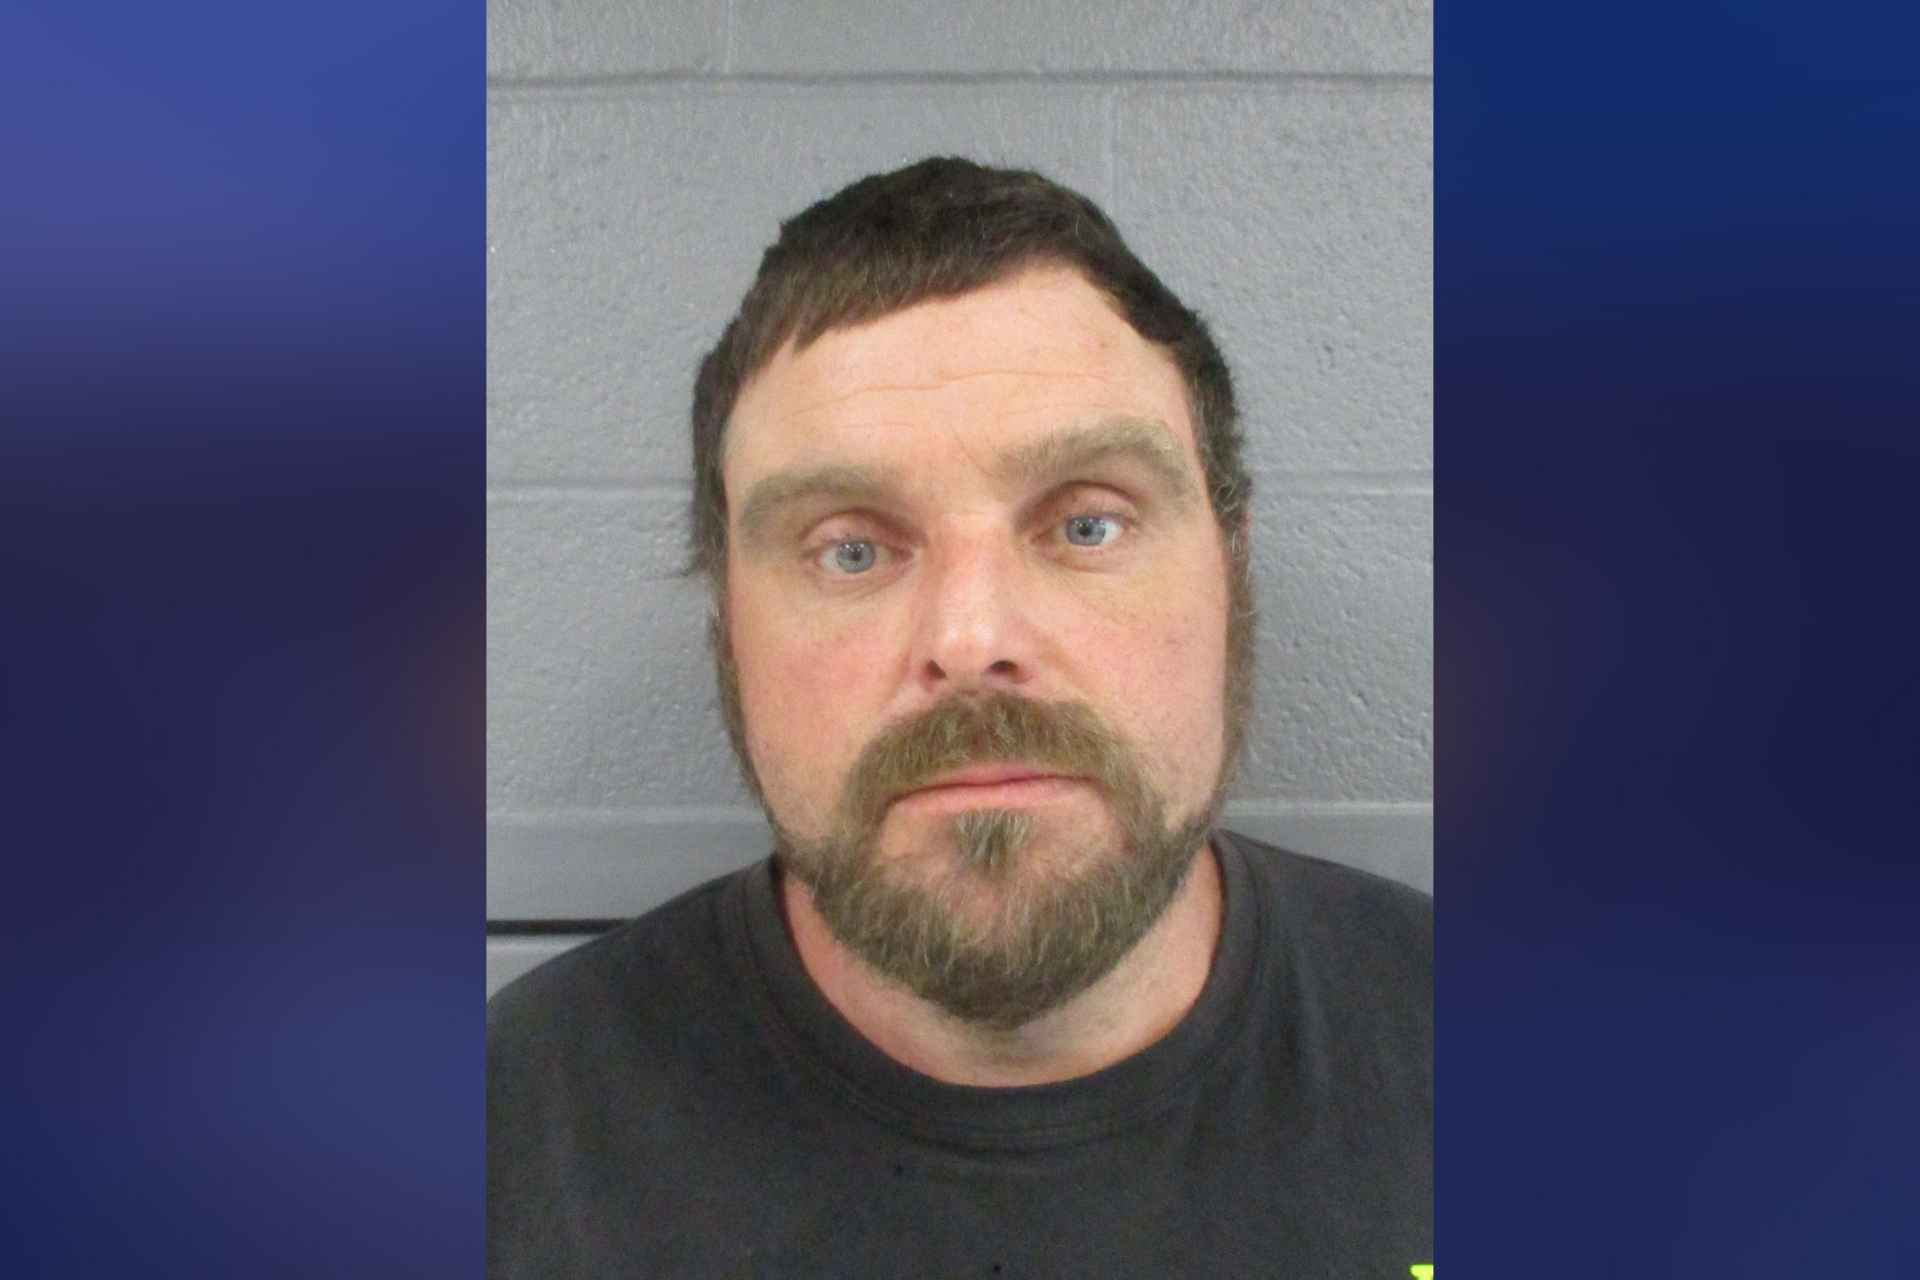 Buckhannon man arrested for allegedly using a worthless check to obtain vehicle parts Adult Picture